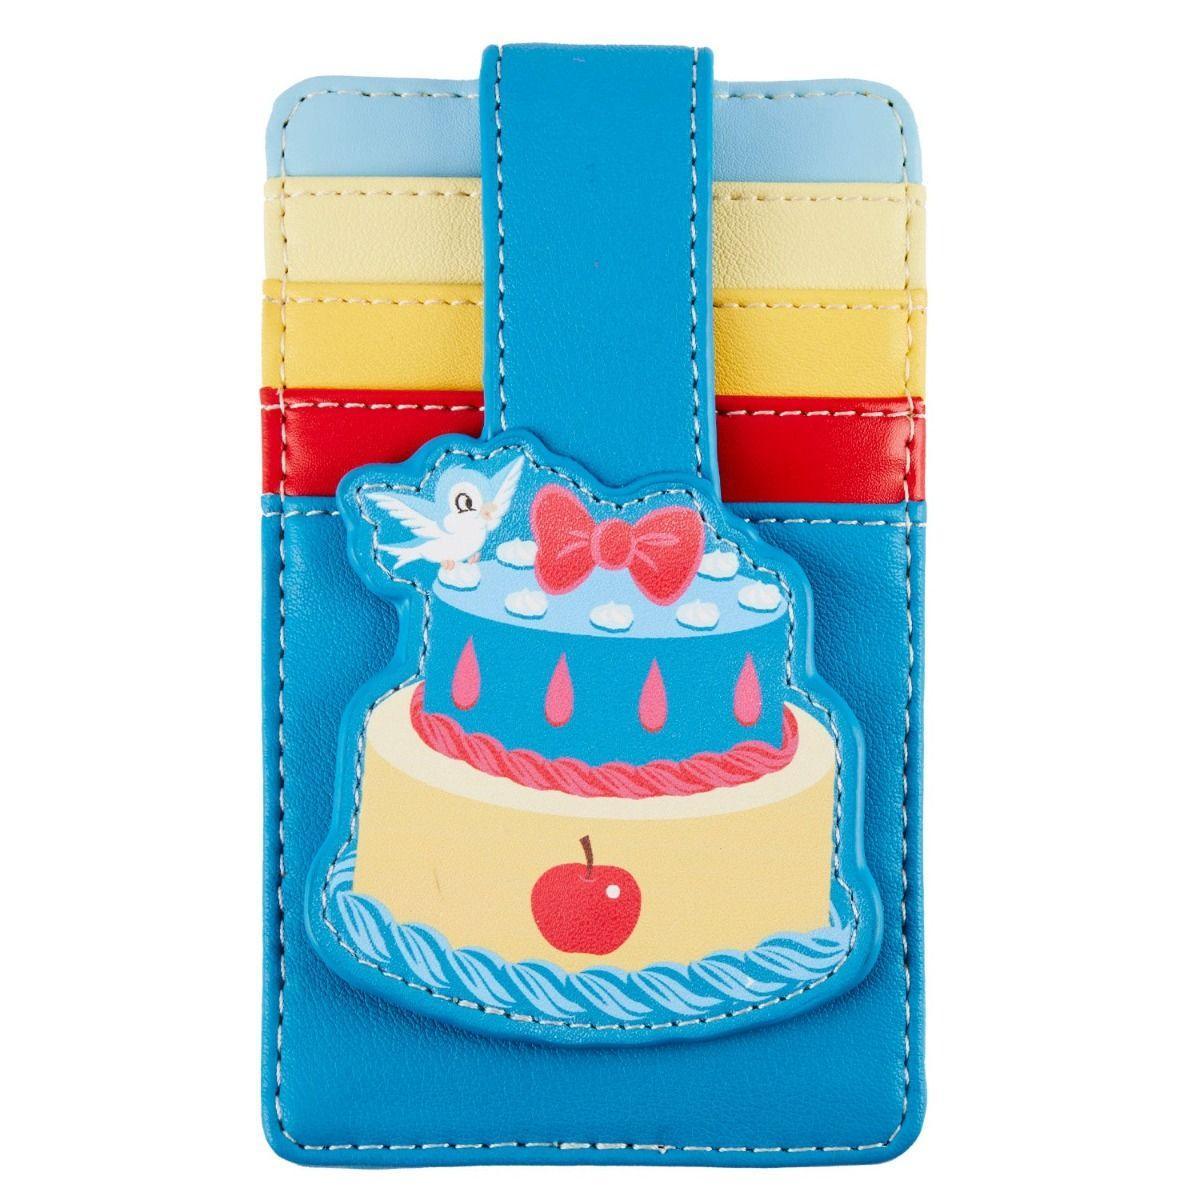 LOUWDWA1949 Snow White and the Seven Dwarfs - Cake Card Holder - Loungefly - Titan Pop Culture